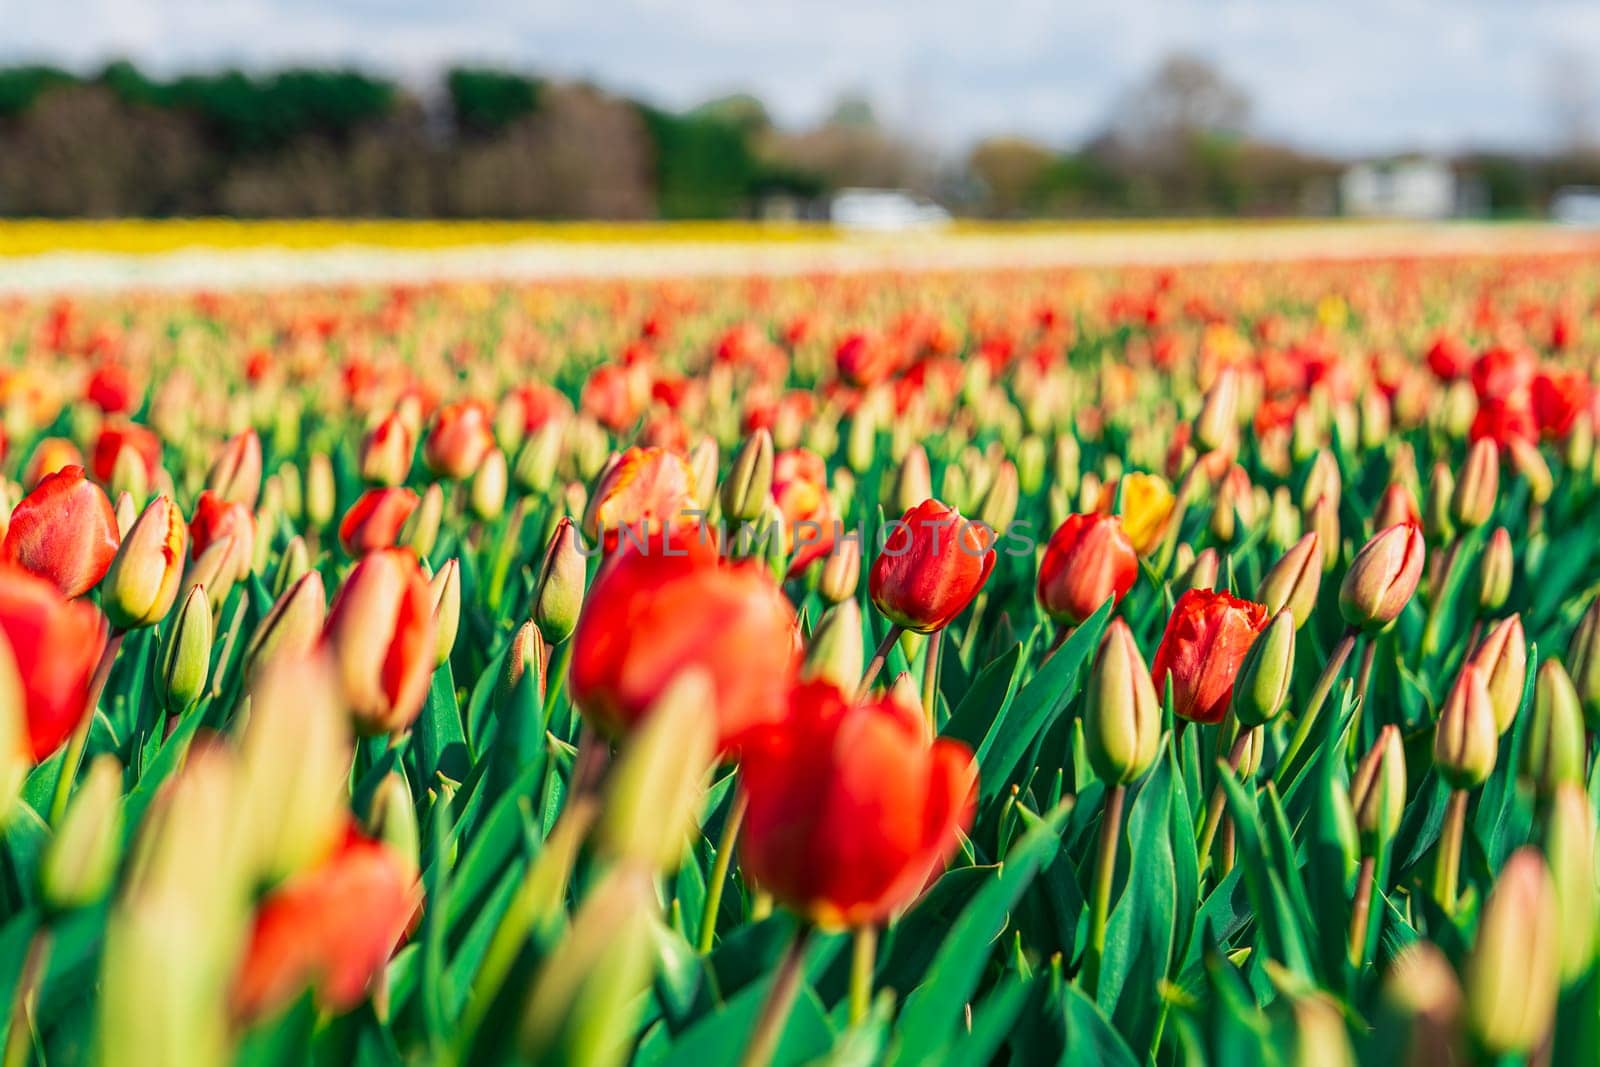 An awe-inspiring panoramic view of the Dutch countryside, showcasing an unending expanse of vivid red and yellow tulips against a backdrop of a clear blue sky.